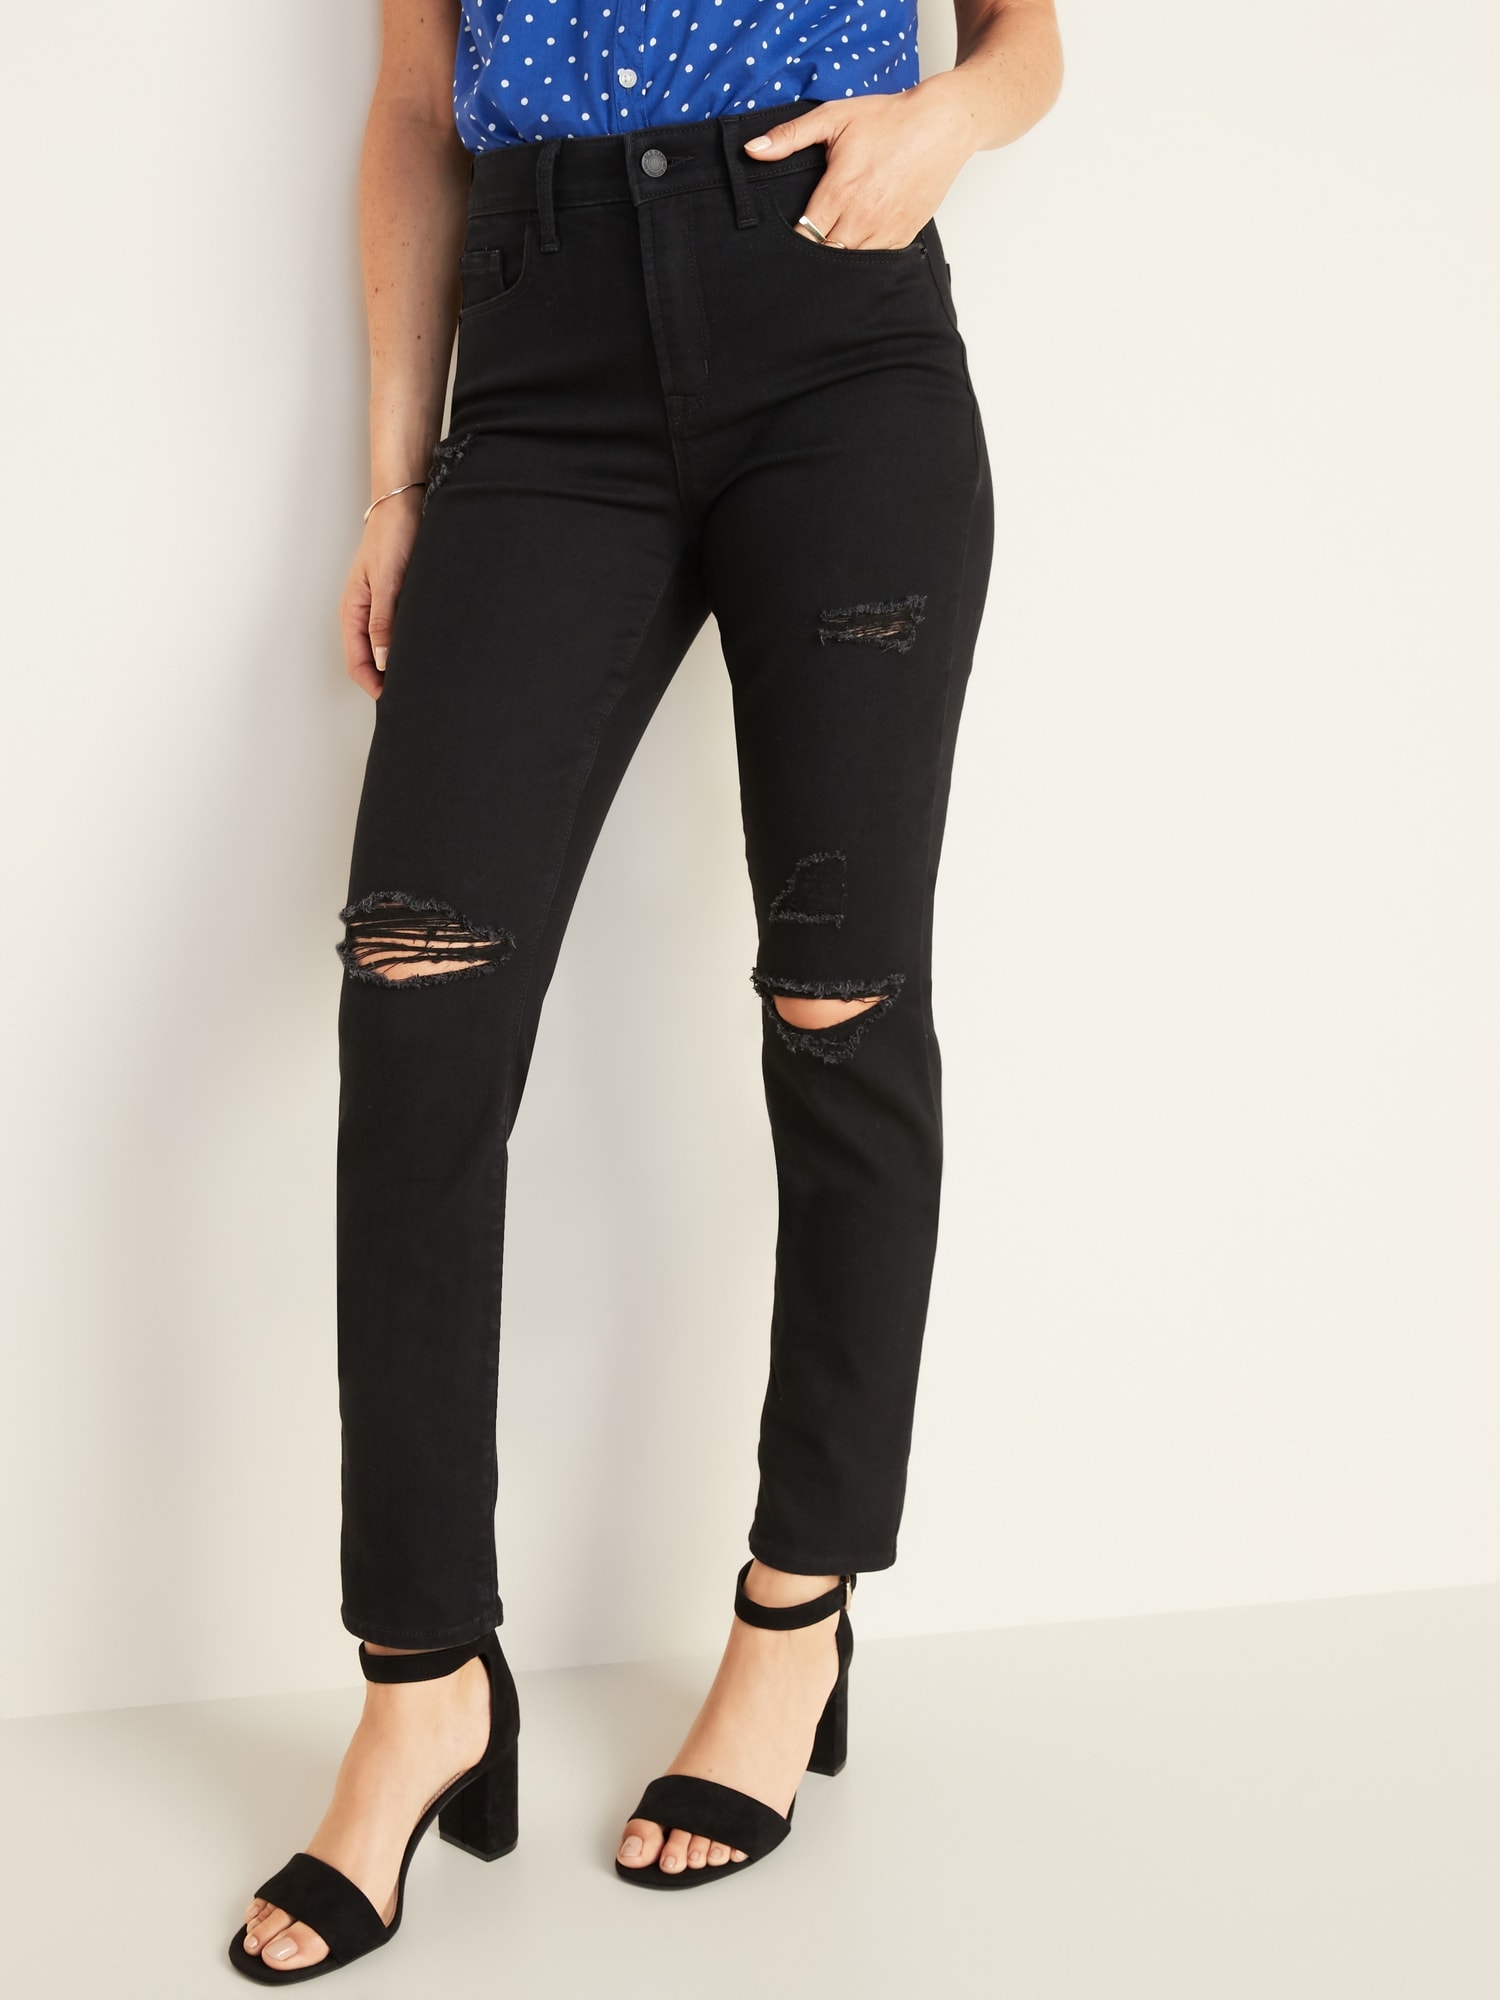 high waisted straight black jeans